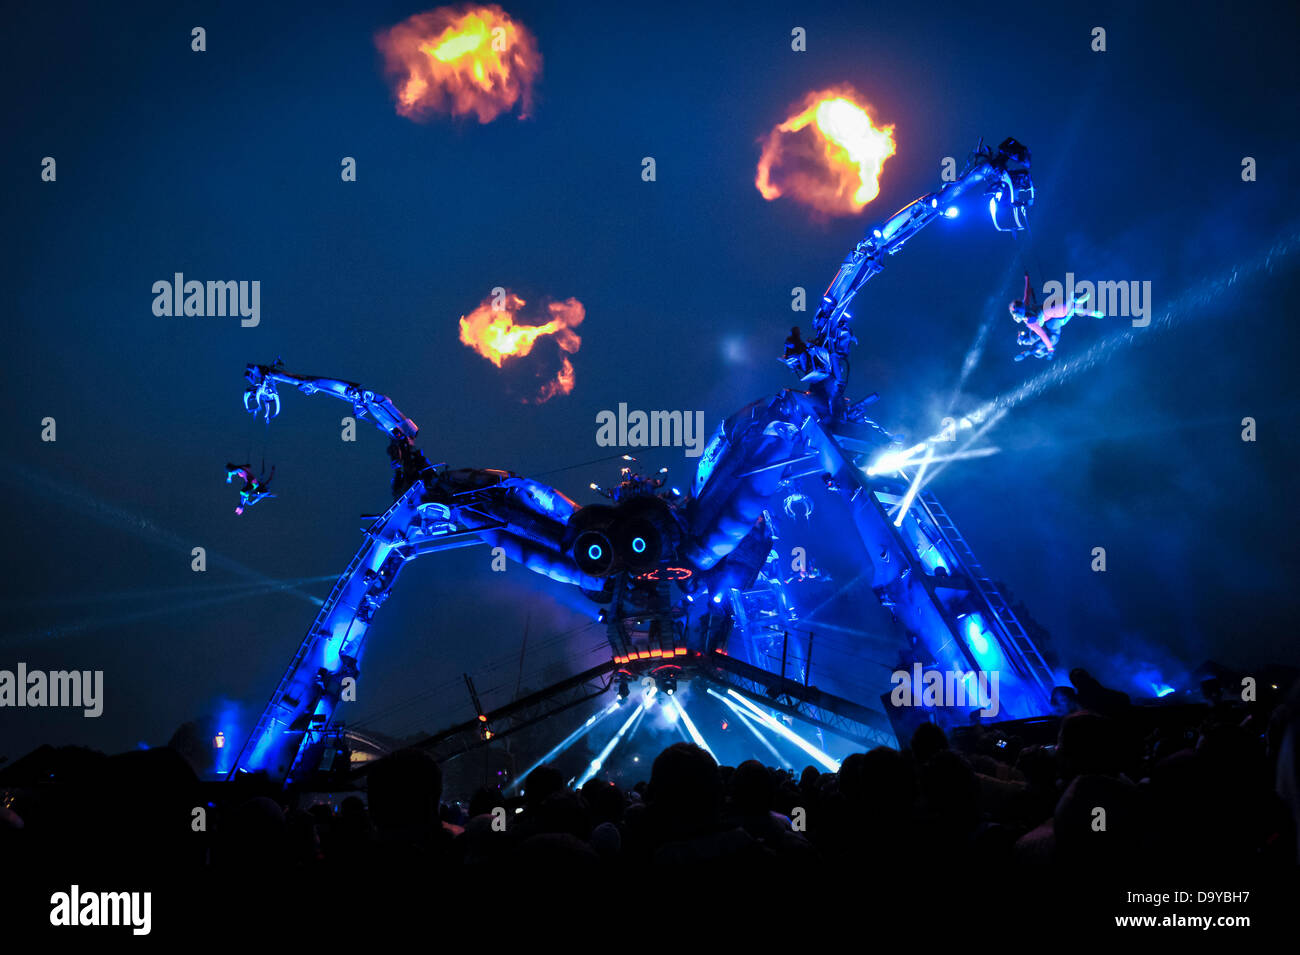 Glastonbury, UK. 28th June 2013. GLASTONBURY MUSIC FESTIVAL UK  2013 Festival goers watch a performance of Arcadia, a giant spider consisting of flames and lasers in tune to bass-pounding music DJs at the arts and music festival. GLASTONBURY MUSIC FESTIVAL PILTON, SOMERSET, ENGLAND, UK Stock Photo